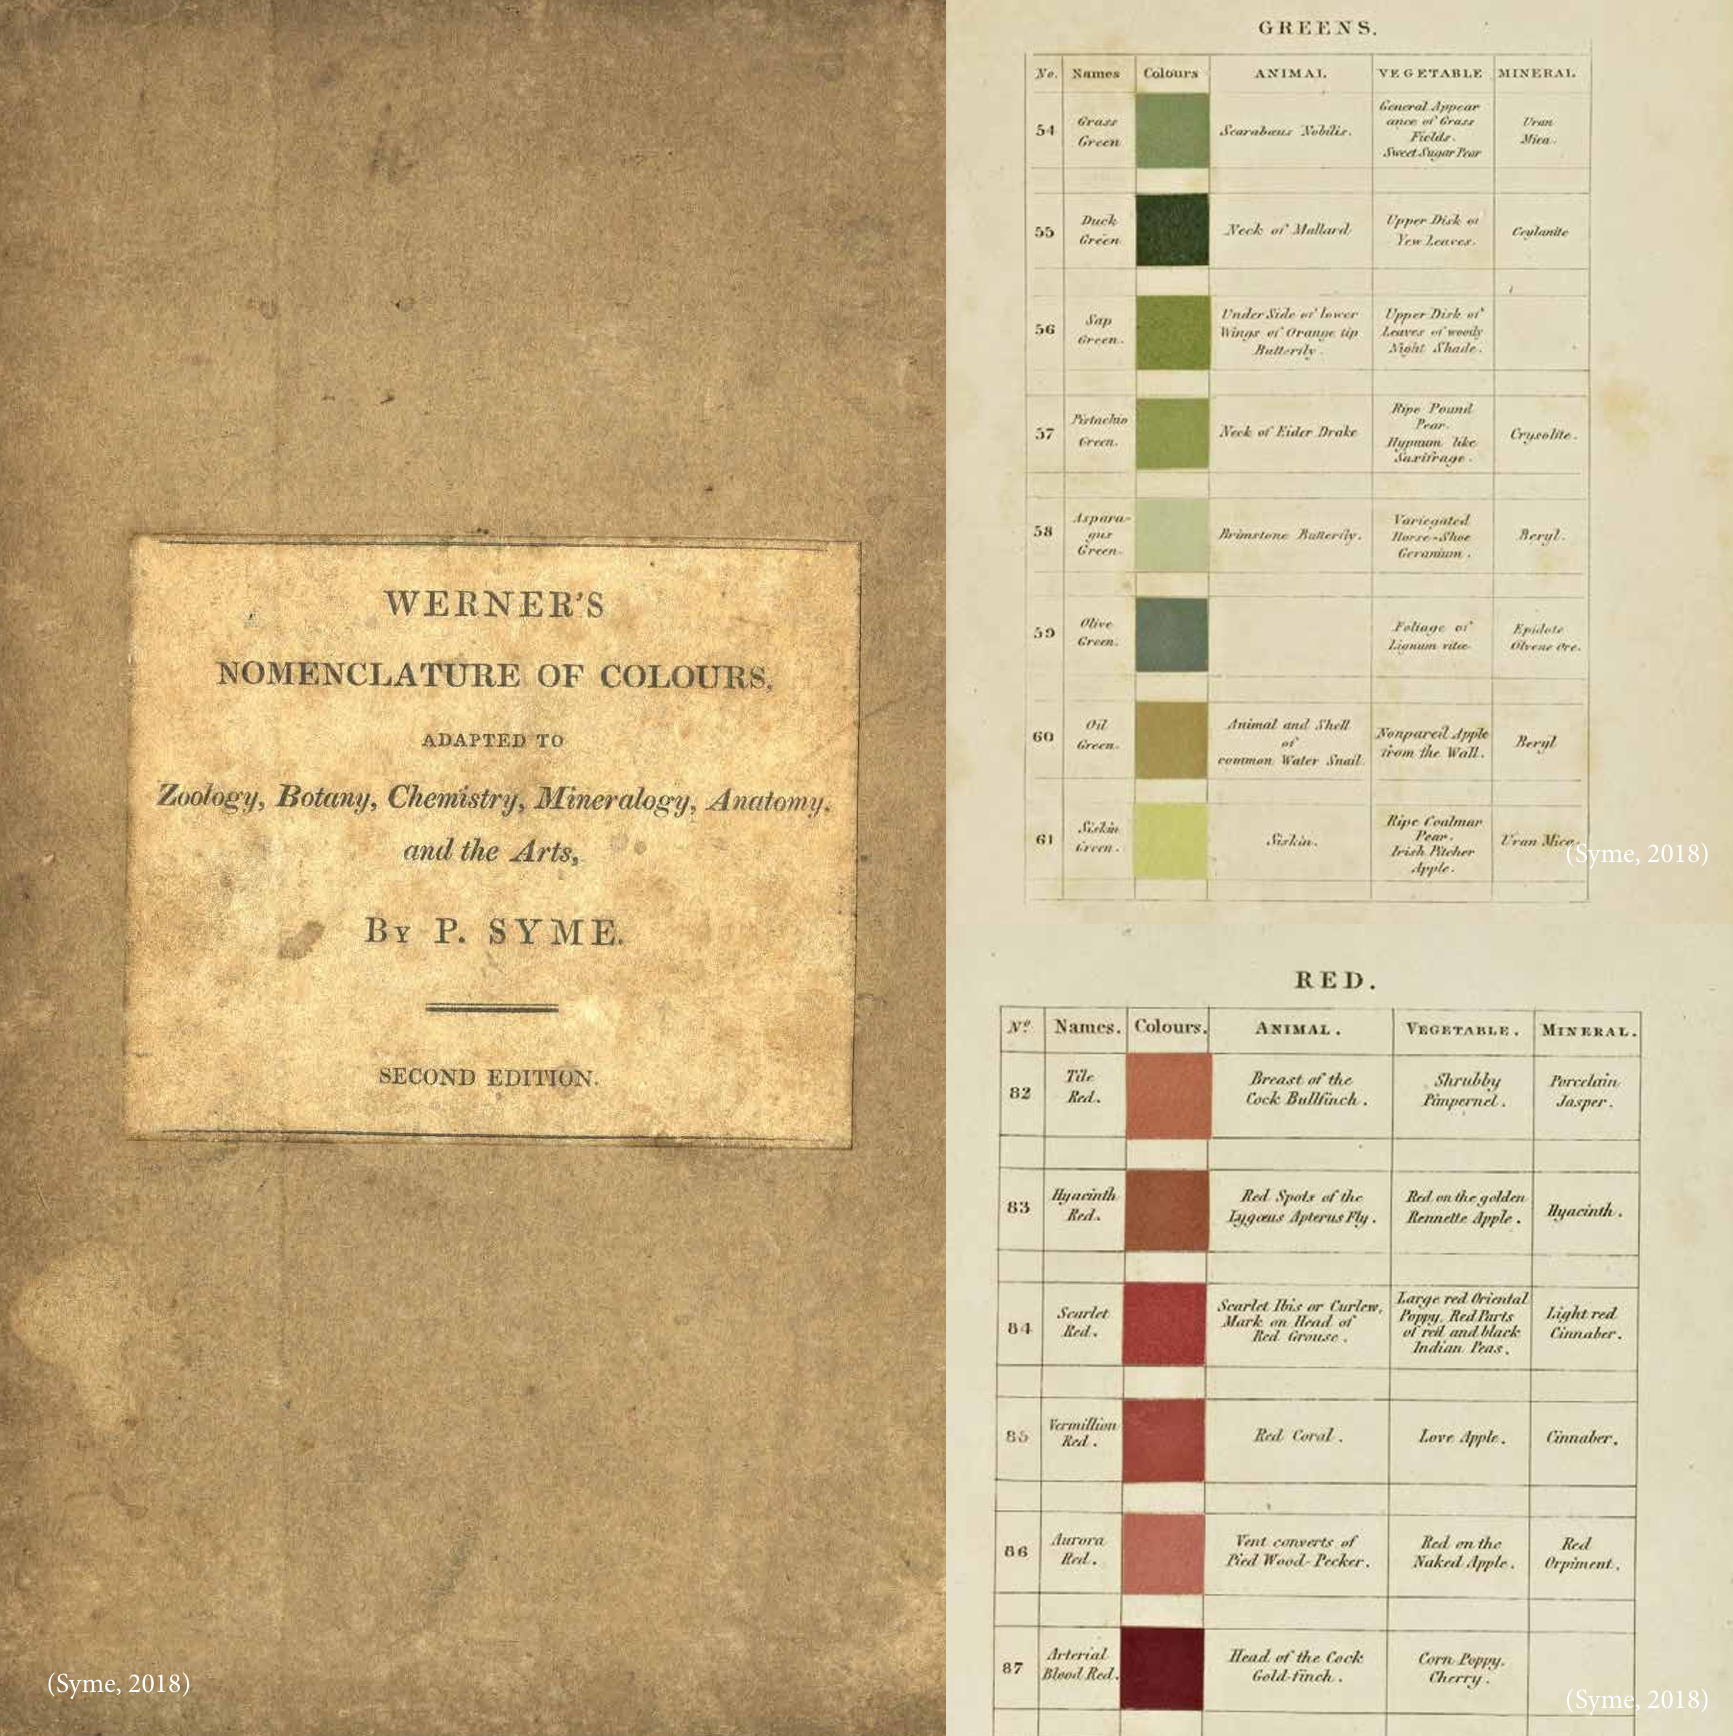 A collage of images from the book Werner's nomenclature of color, showing shades of green and red